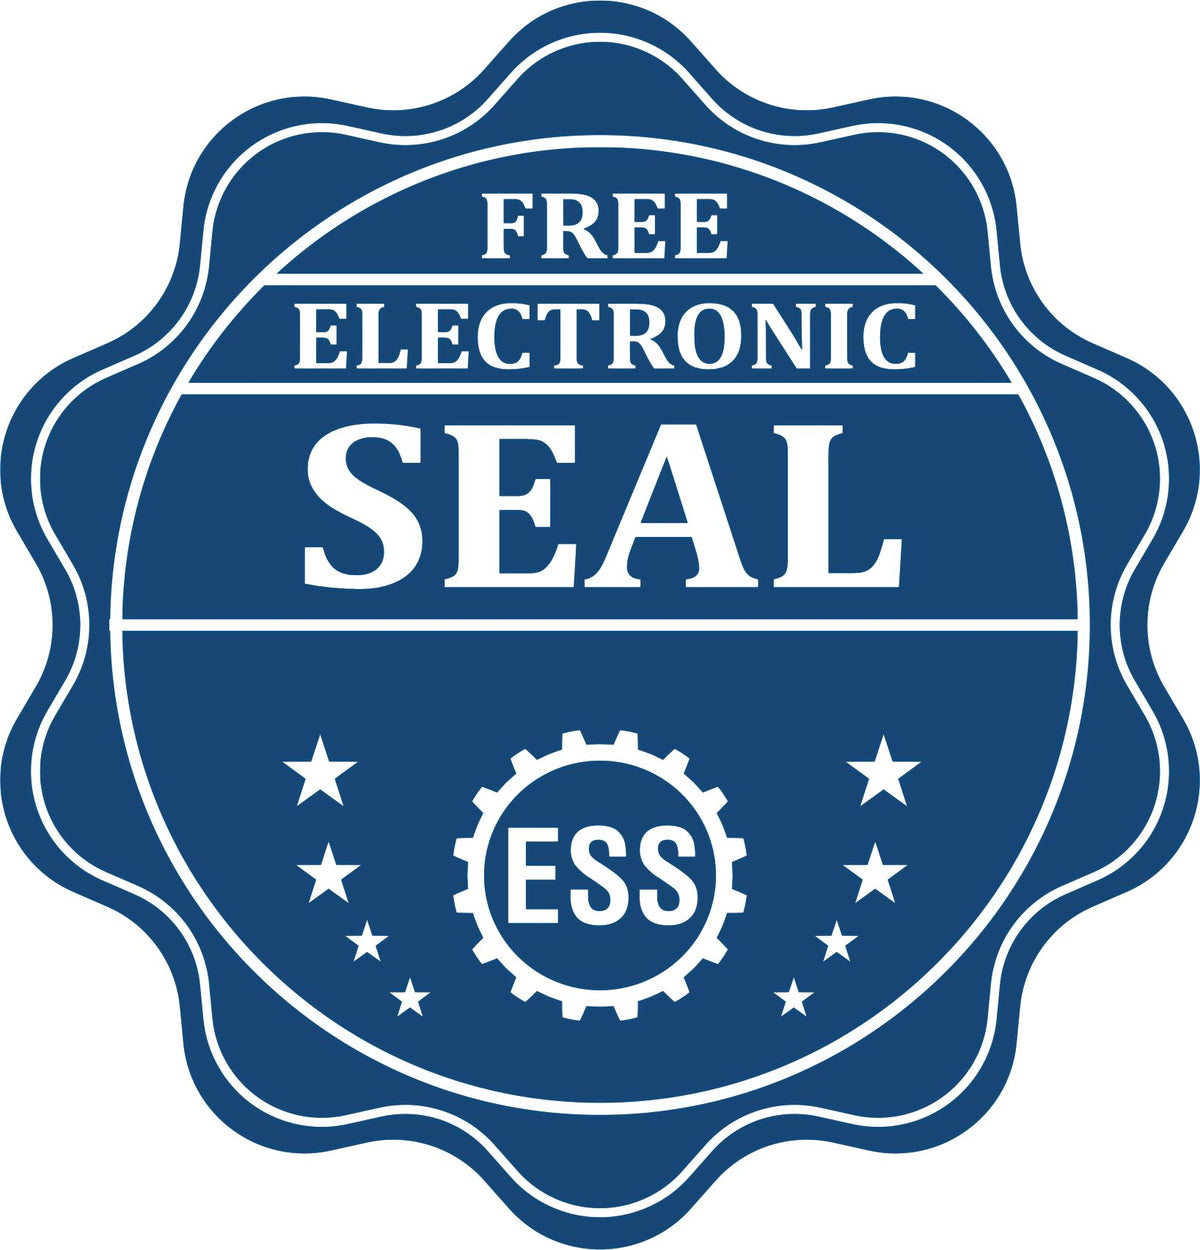 A badge showing a free electronic seal for the Heavy Duty Cast Iron North Dakota Geologist Seal Embosser with stars and the ESS gear on the emblem.